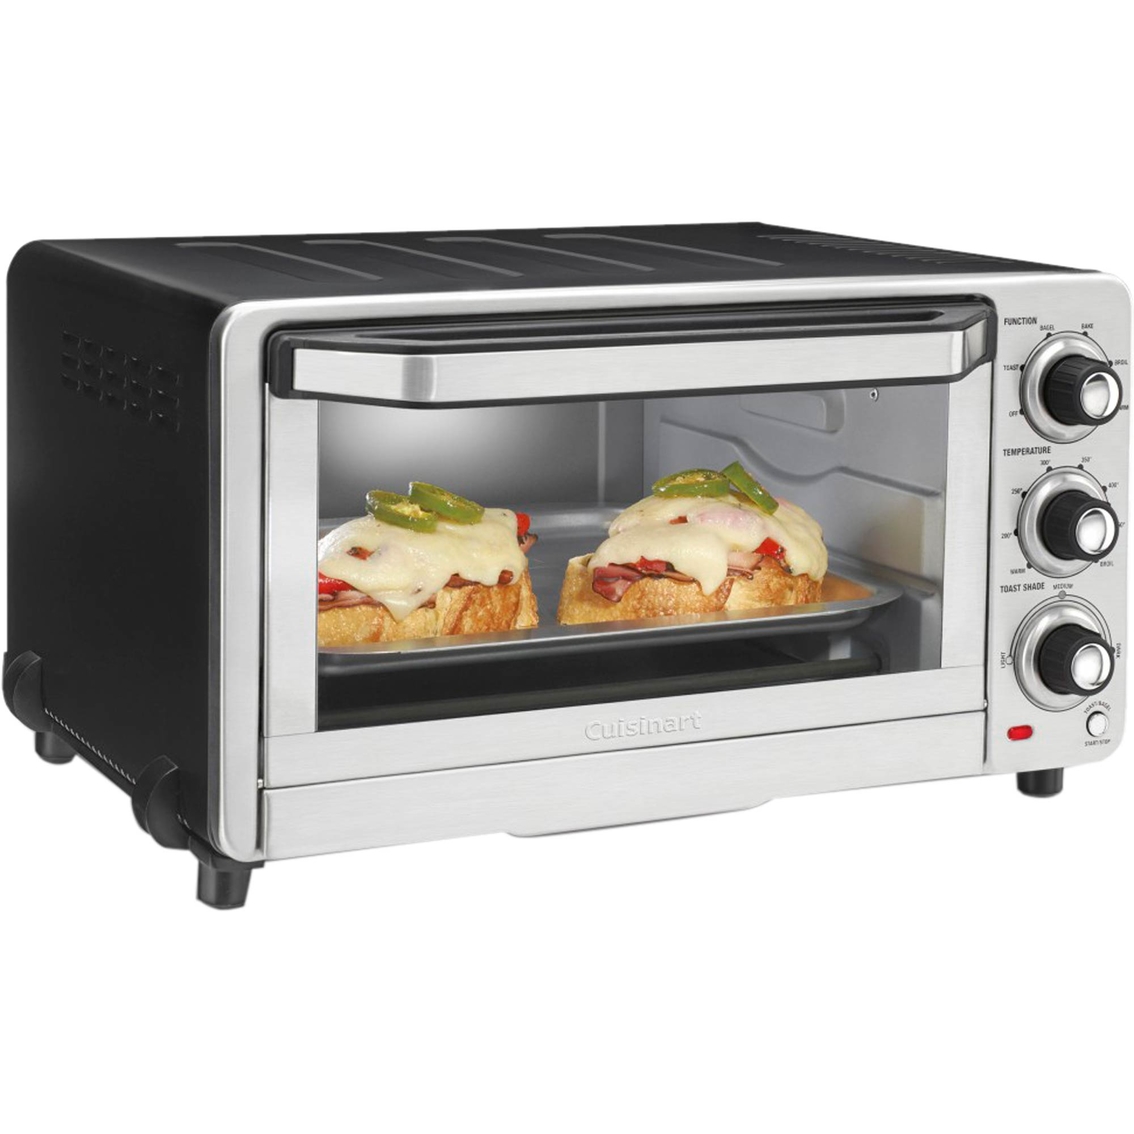 Cuisinart CustomClassic Toaster Oven Broiler - Image 2 of 5